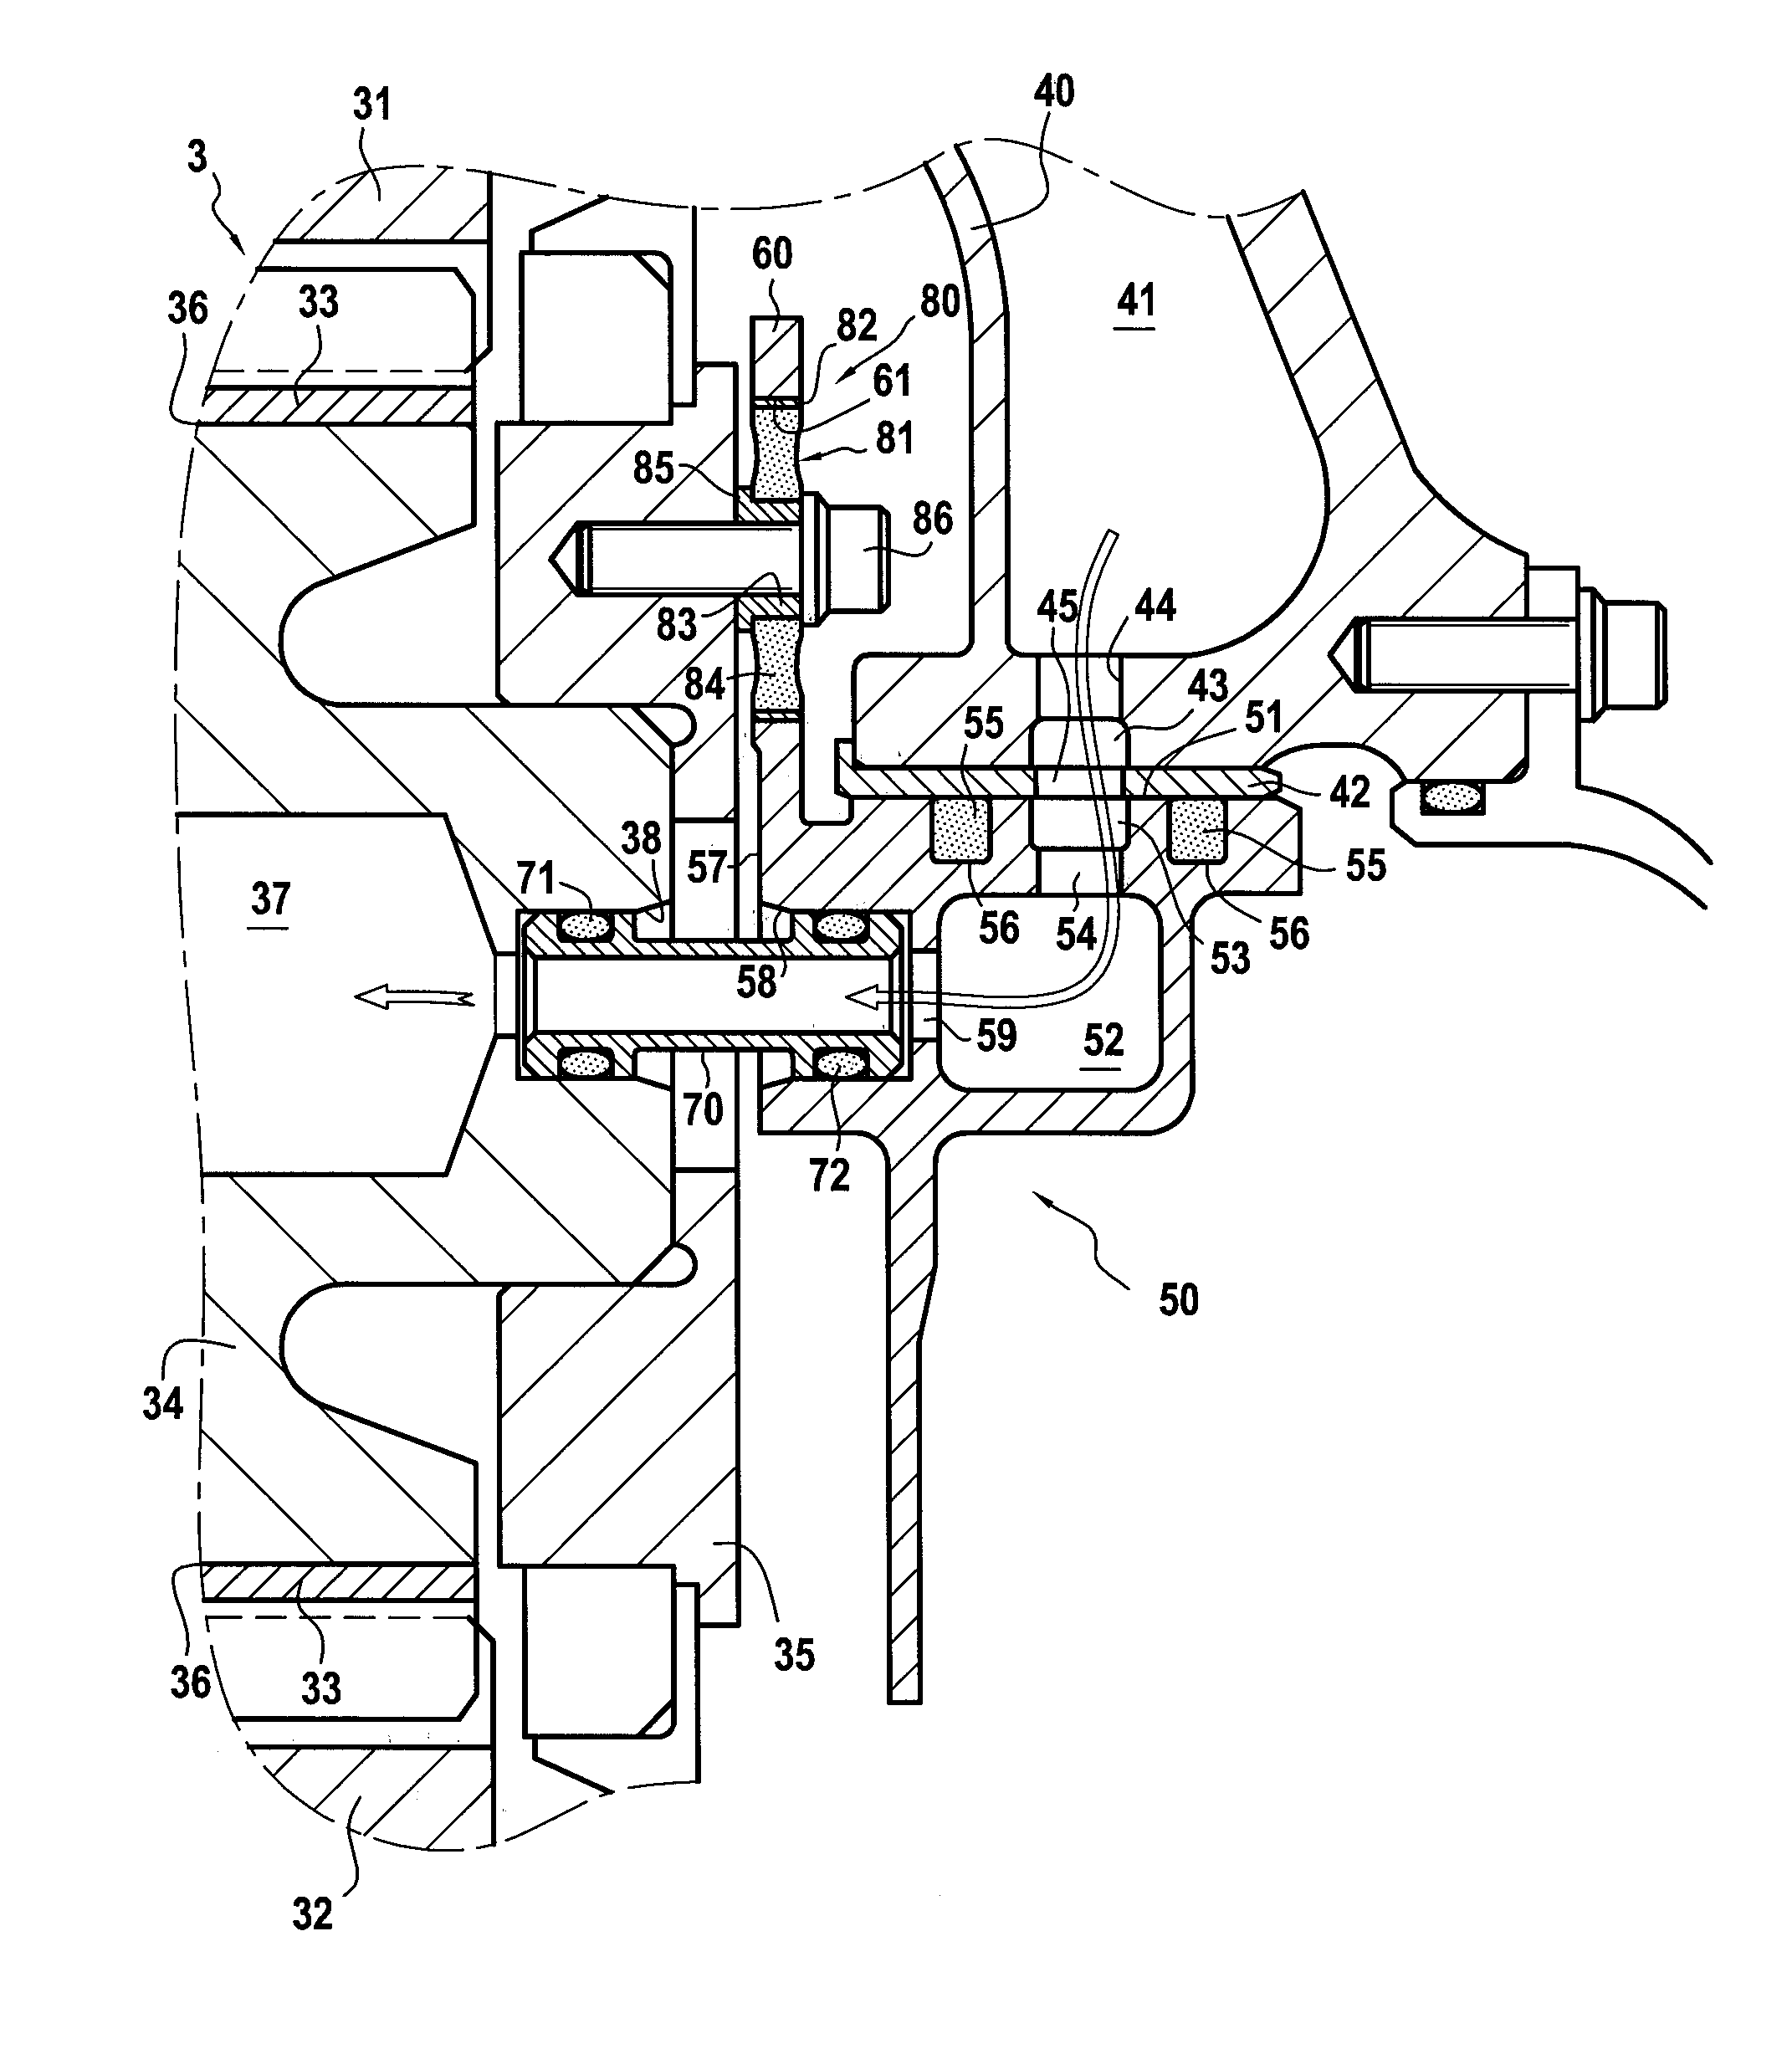 Rotating assembly comprising a transmission member and an oil distribution system